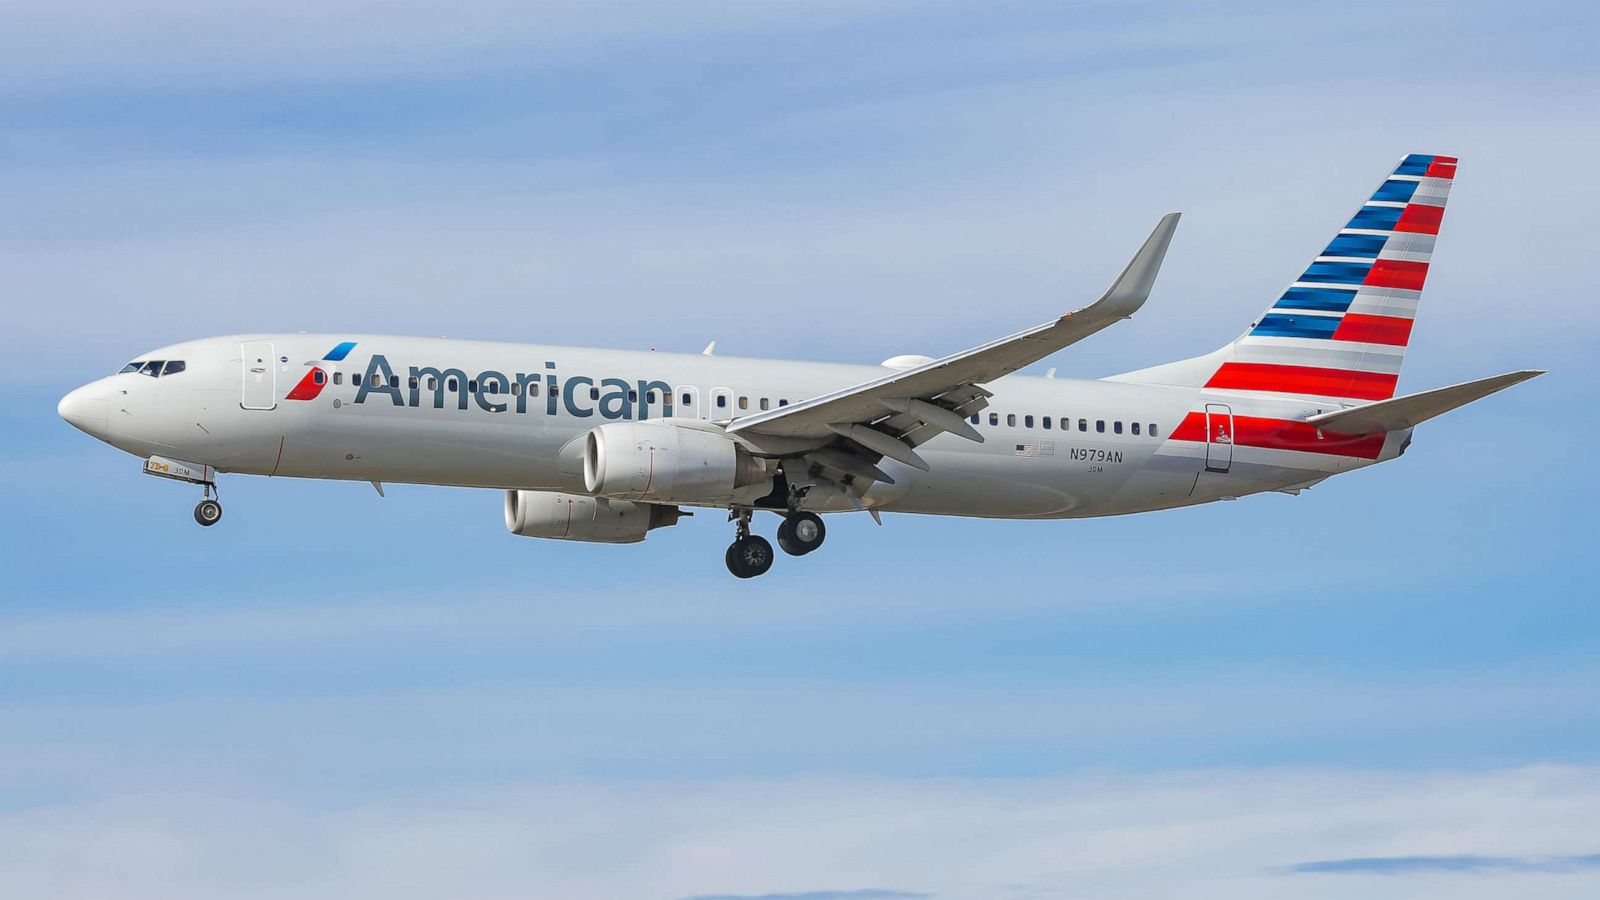 Through American's hub at Dallas Fort Worth International Airport, the airline offers access to approximately 200 destinations worldwide with more than 700 daily flights.